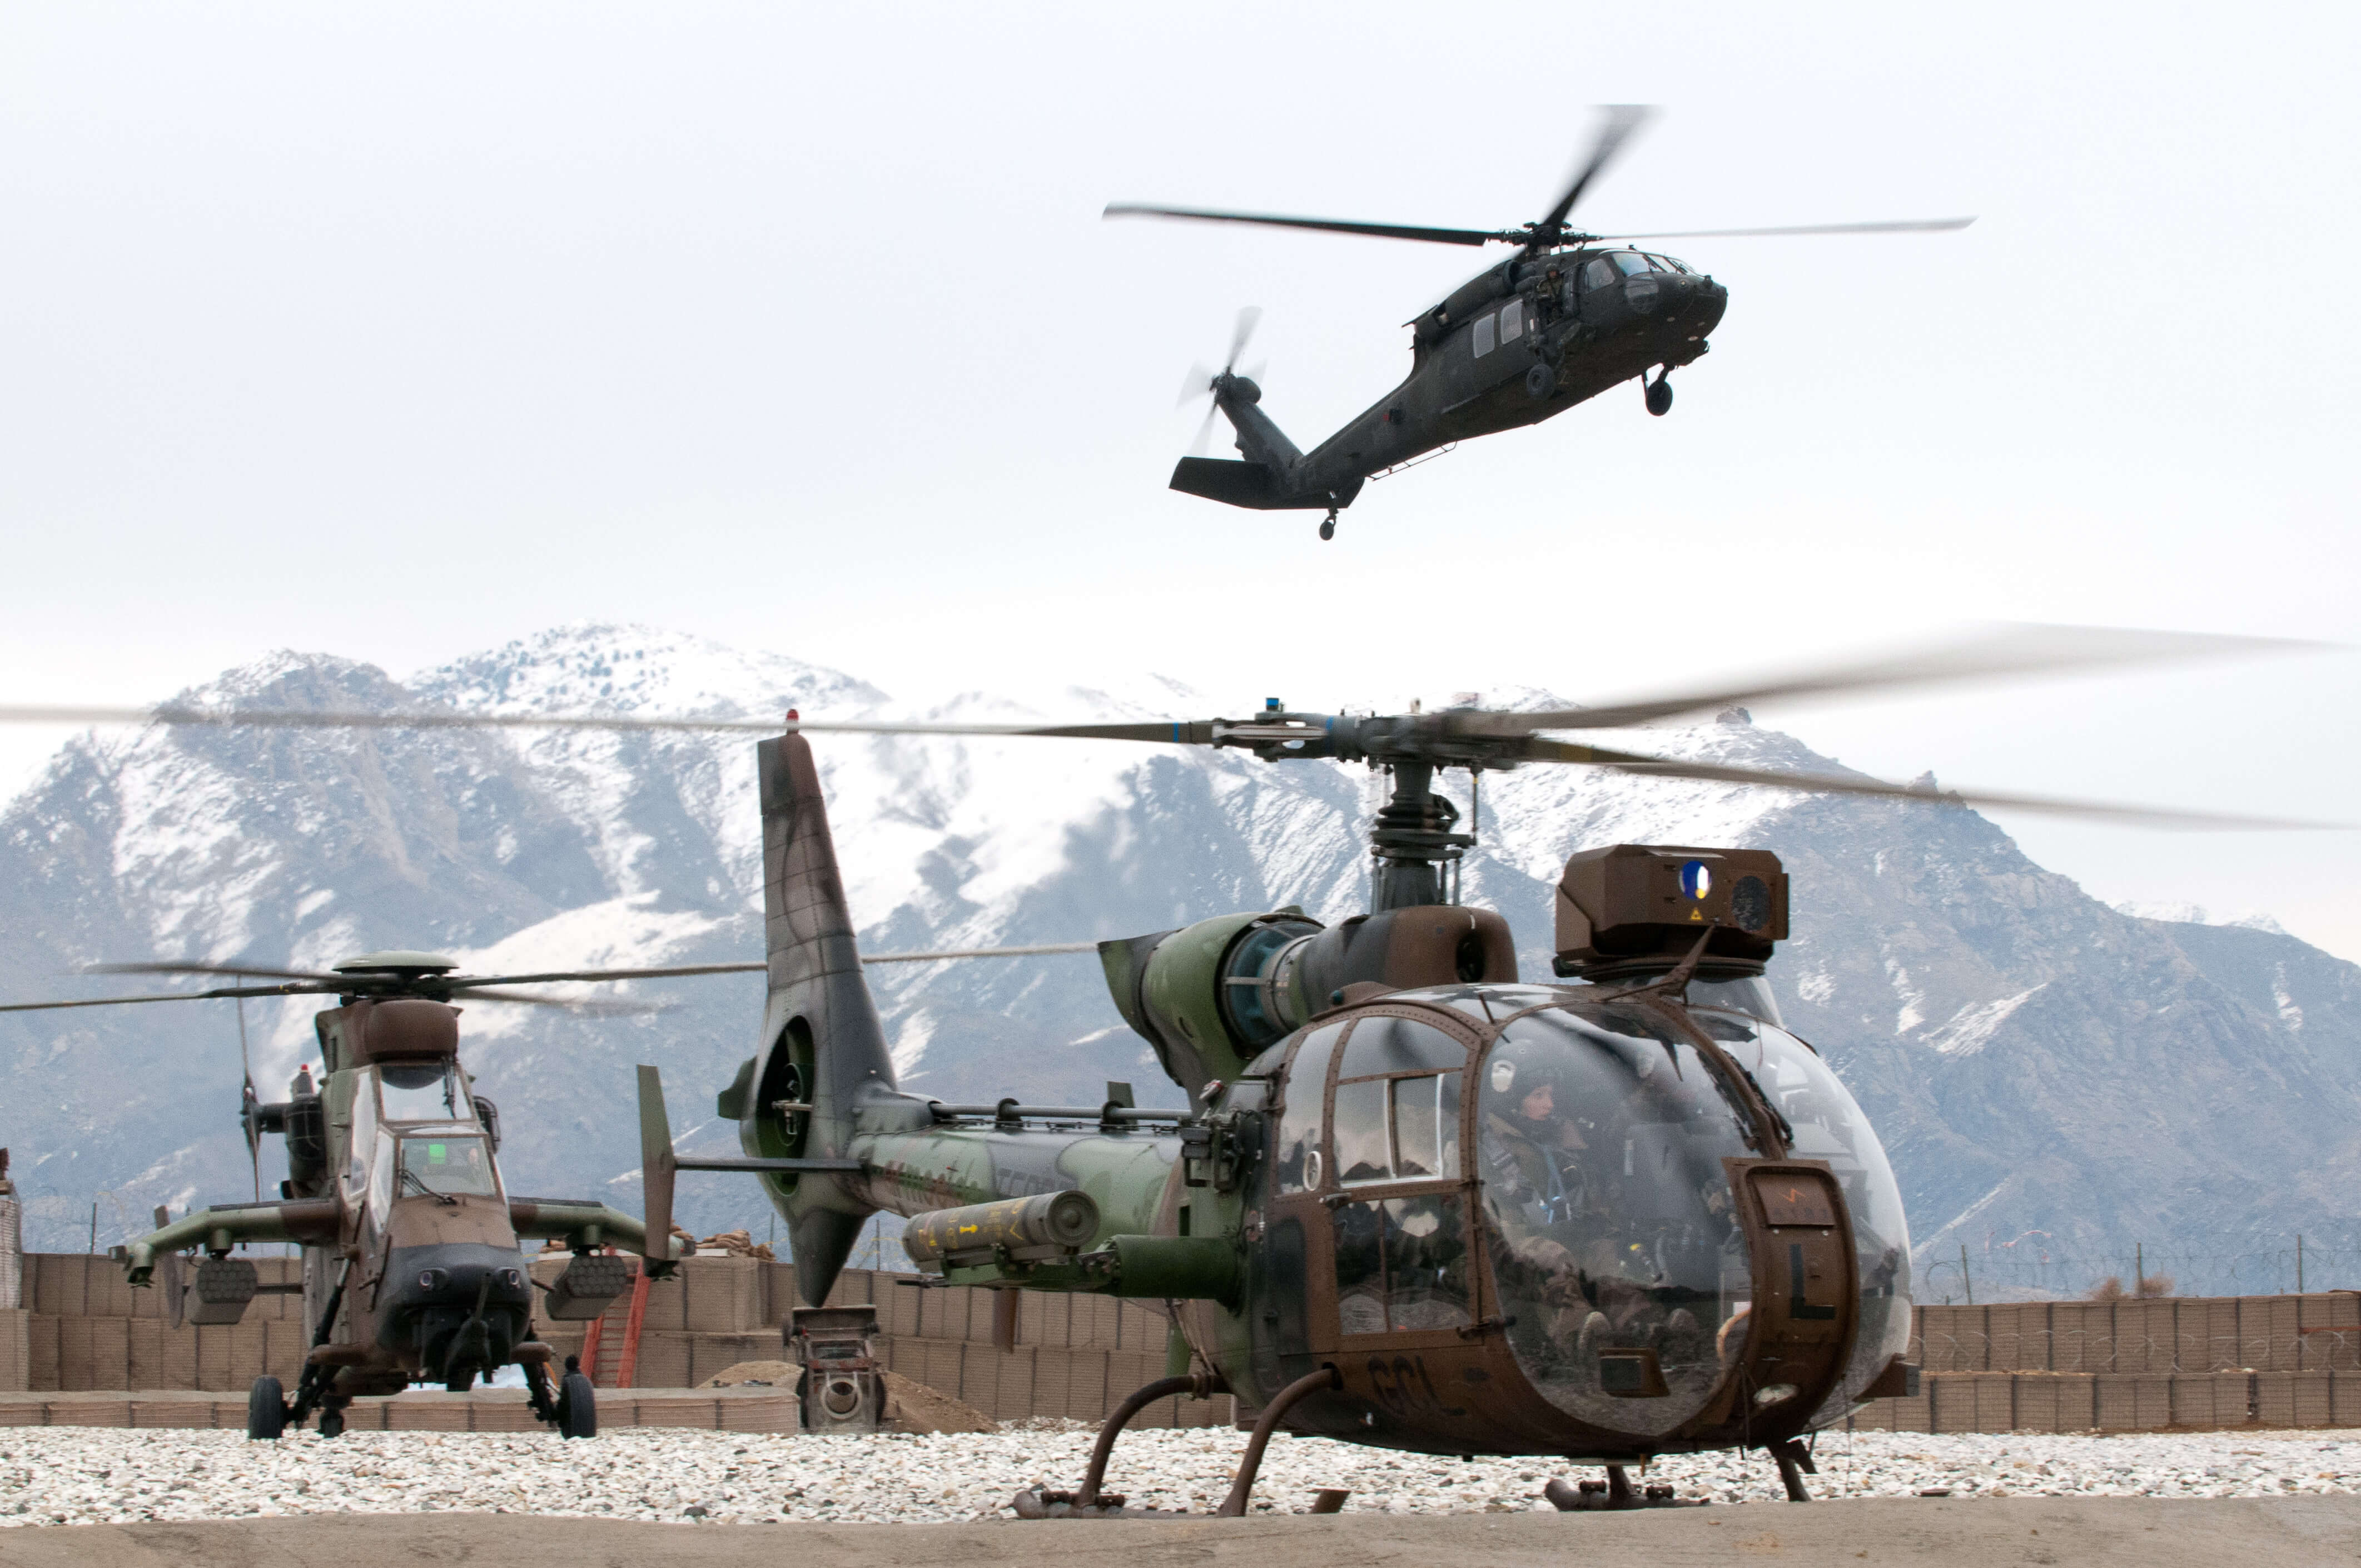 Bouemar-French helicopters, Gazelle (front) and Tigre (rear), wait for a UH-60 Blackhawk helicopter to land at FOB Nejrab, Kapisa province, Afghanistan in 2012. ResoluteSupportMedia